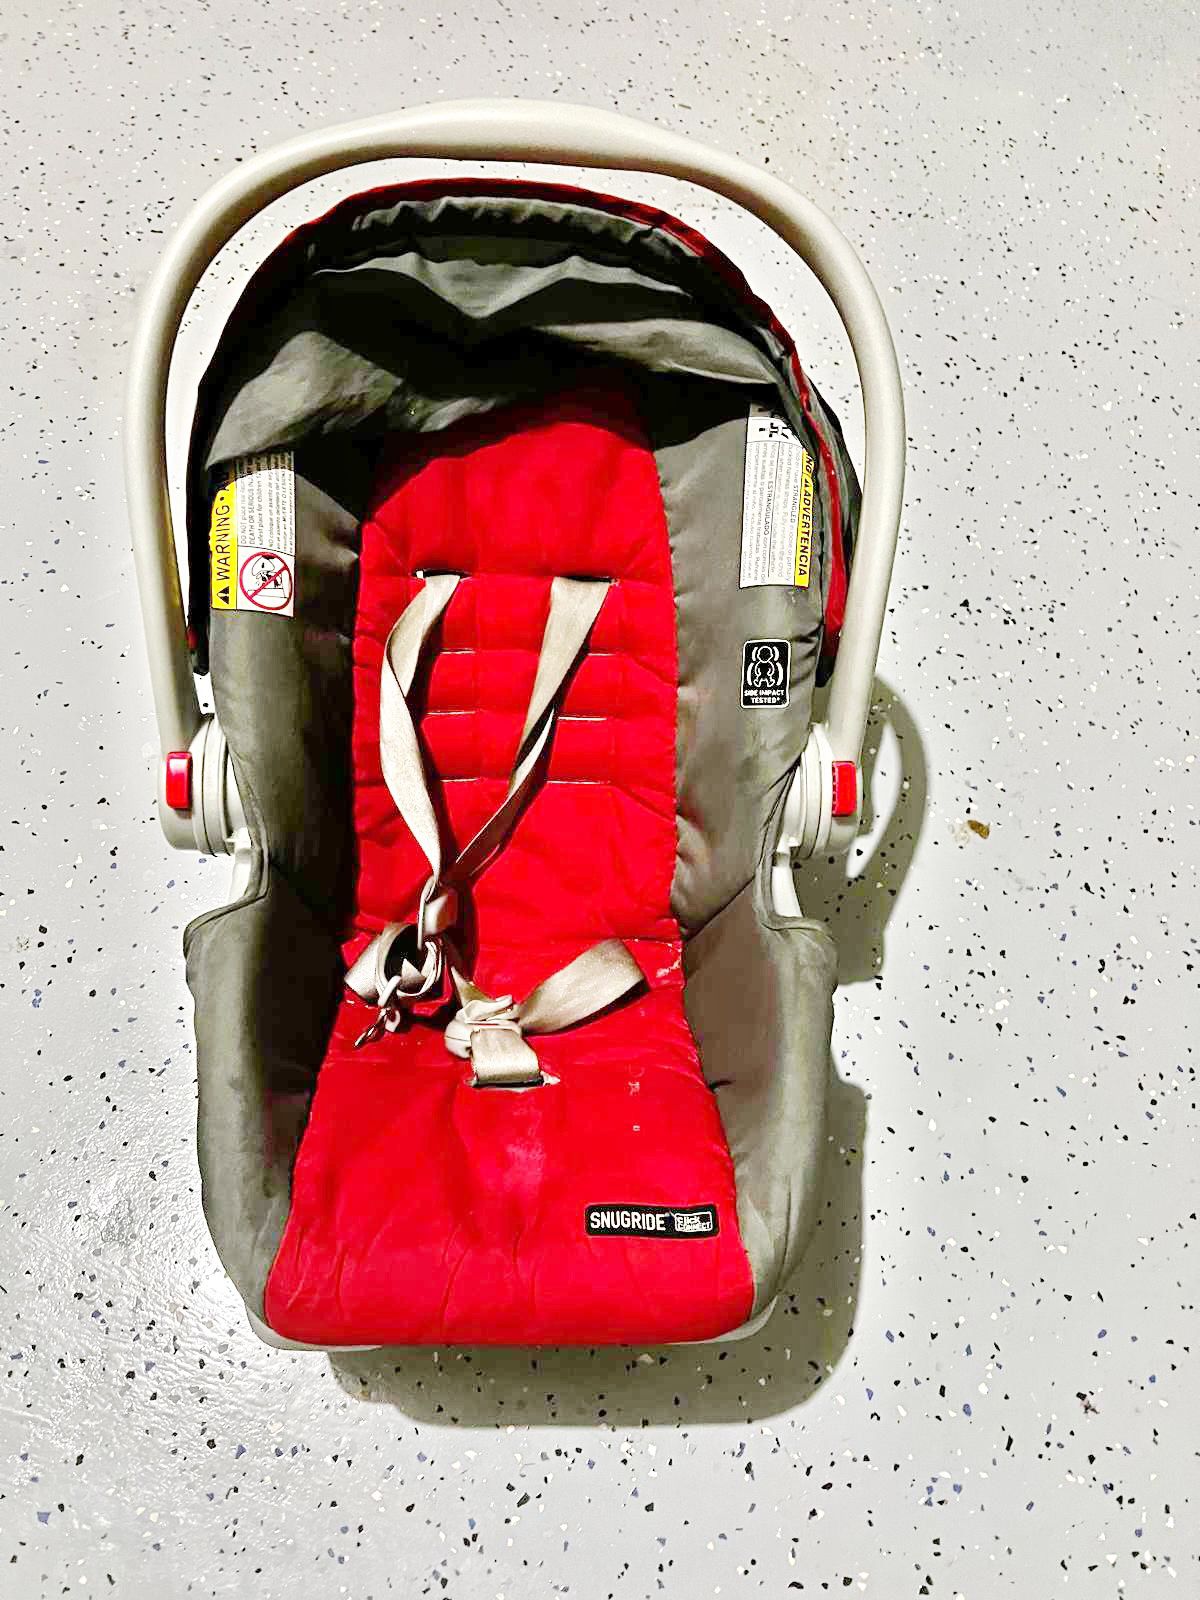 Baby Car Seat And Stroller